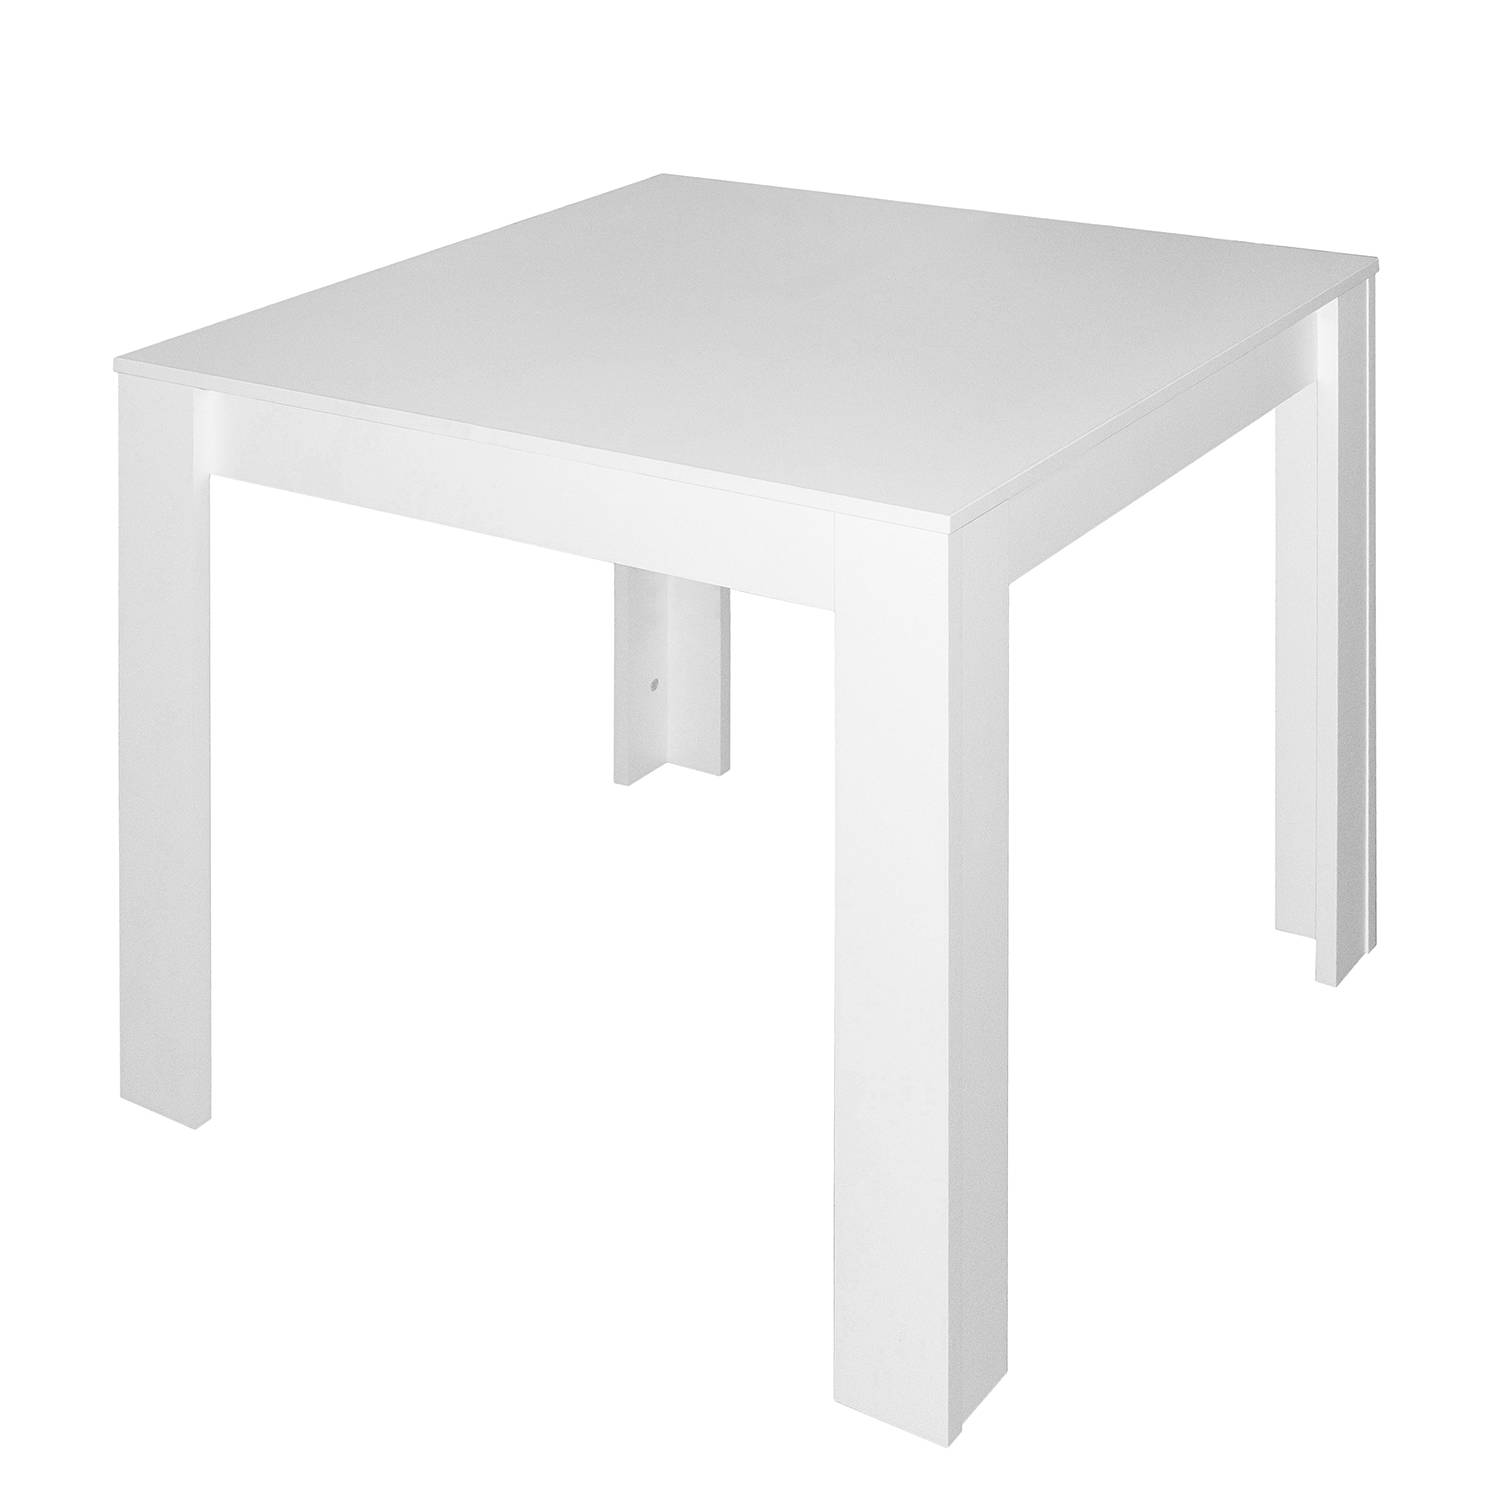 Image of Table Fairford 000000001000121318